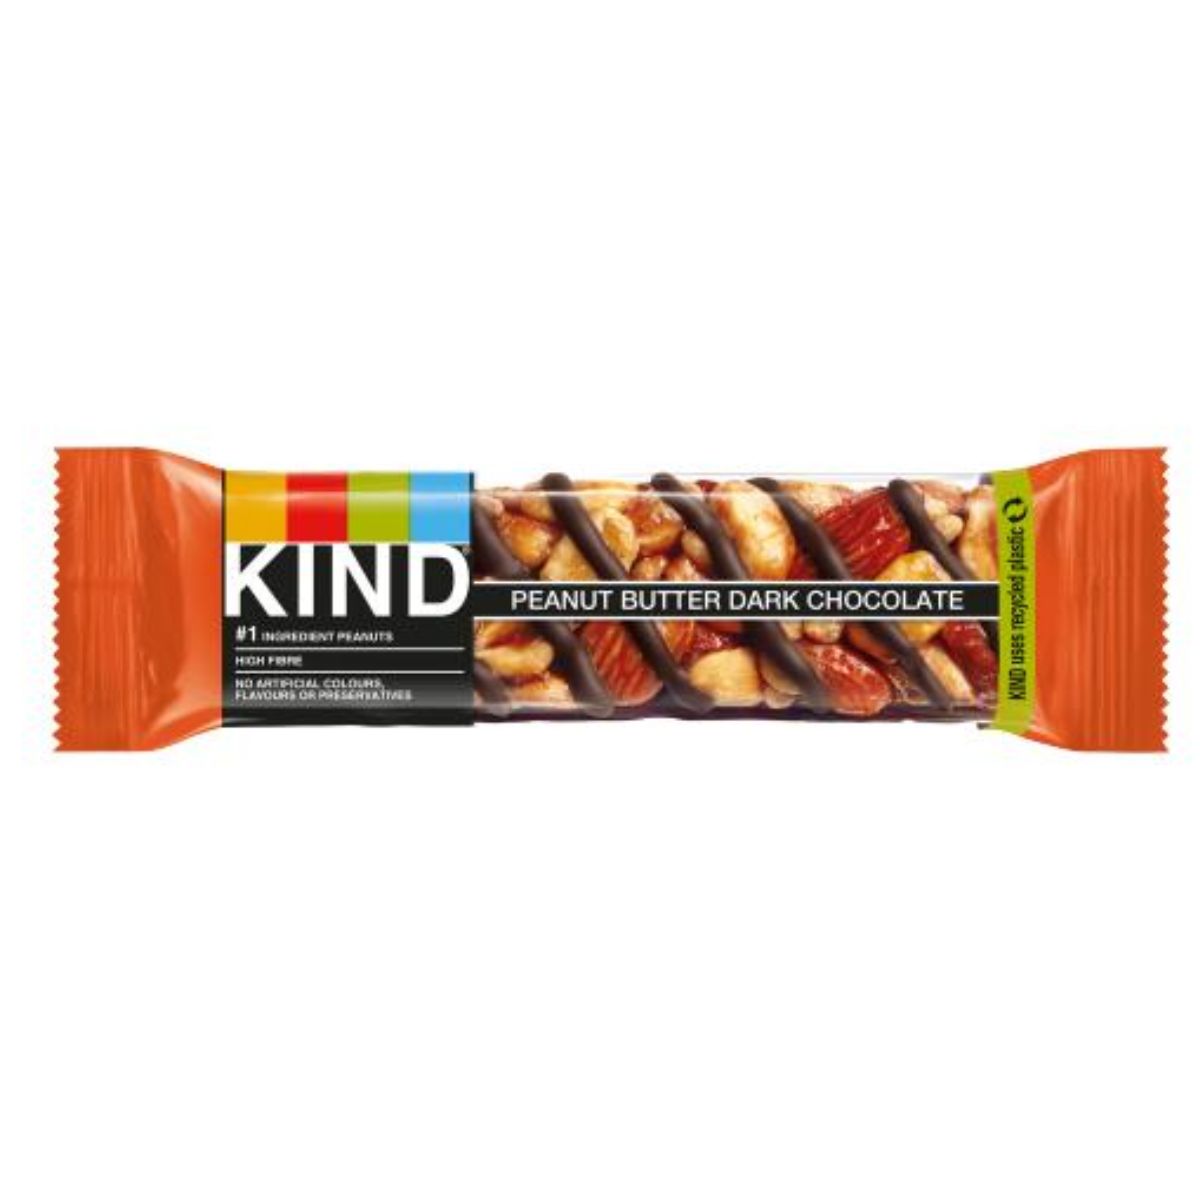 Kind - Peanut Butter Dark Chocolate Snack Bar - 40g bar with almonds and chocolate on a white background.